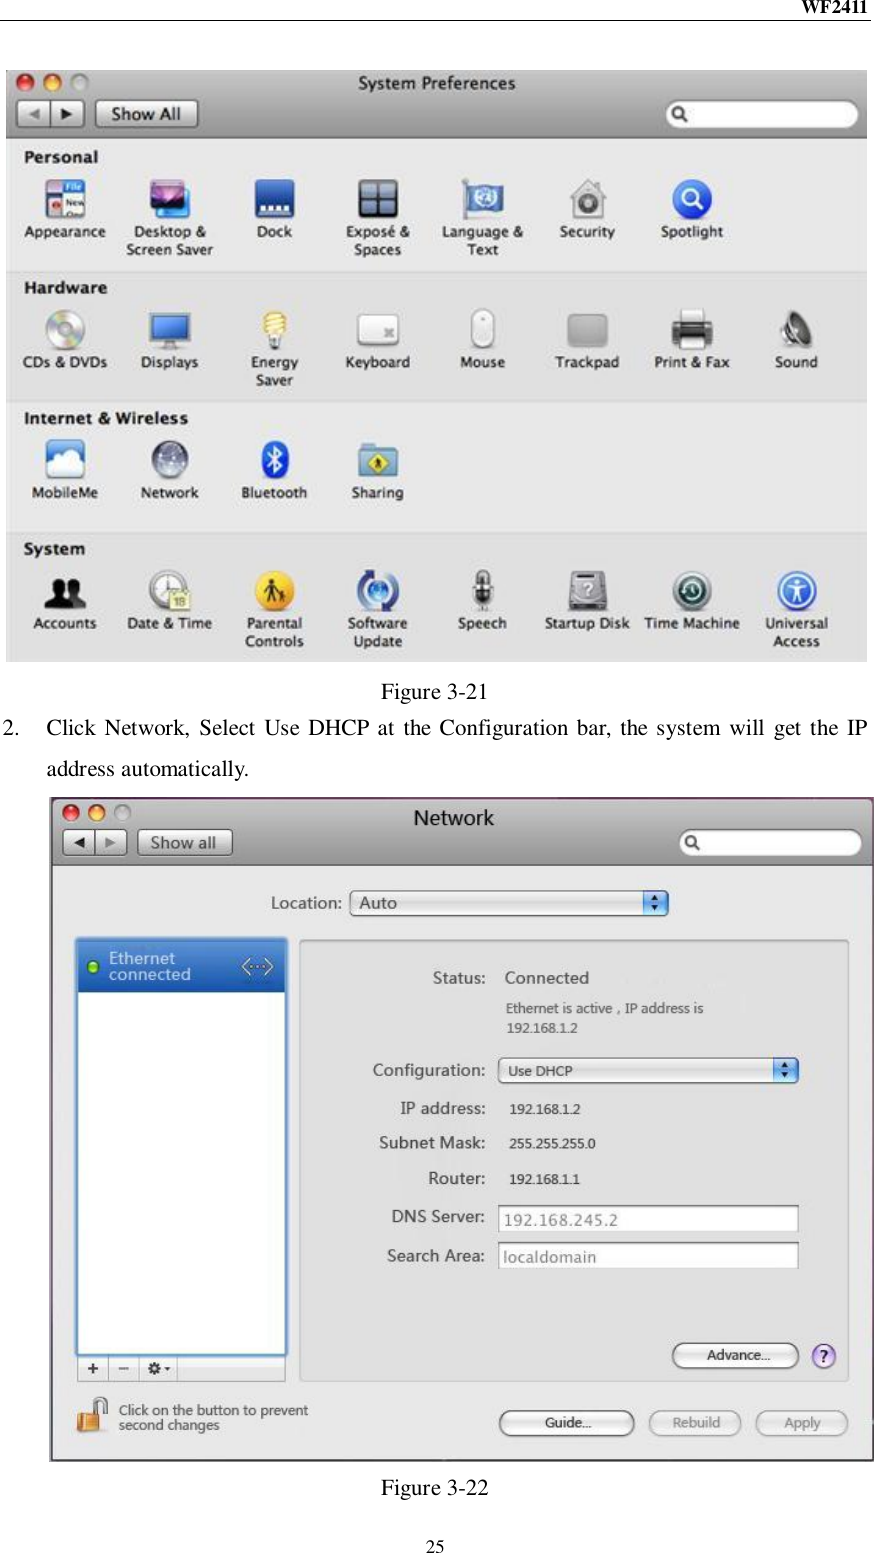 WF2411  25  Figure 3-21 2. Click Network, Select Use DHCP at  the Configuration bar, the system  will  get the IP address automatically.  Figure 3-22 